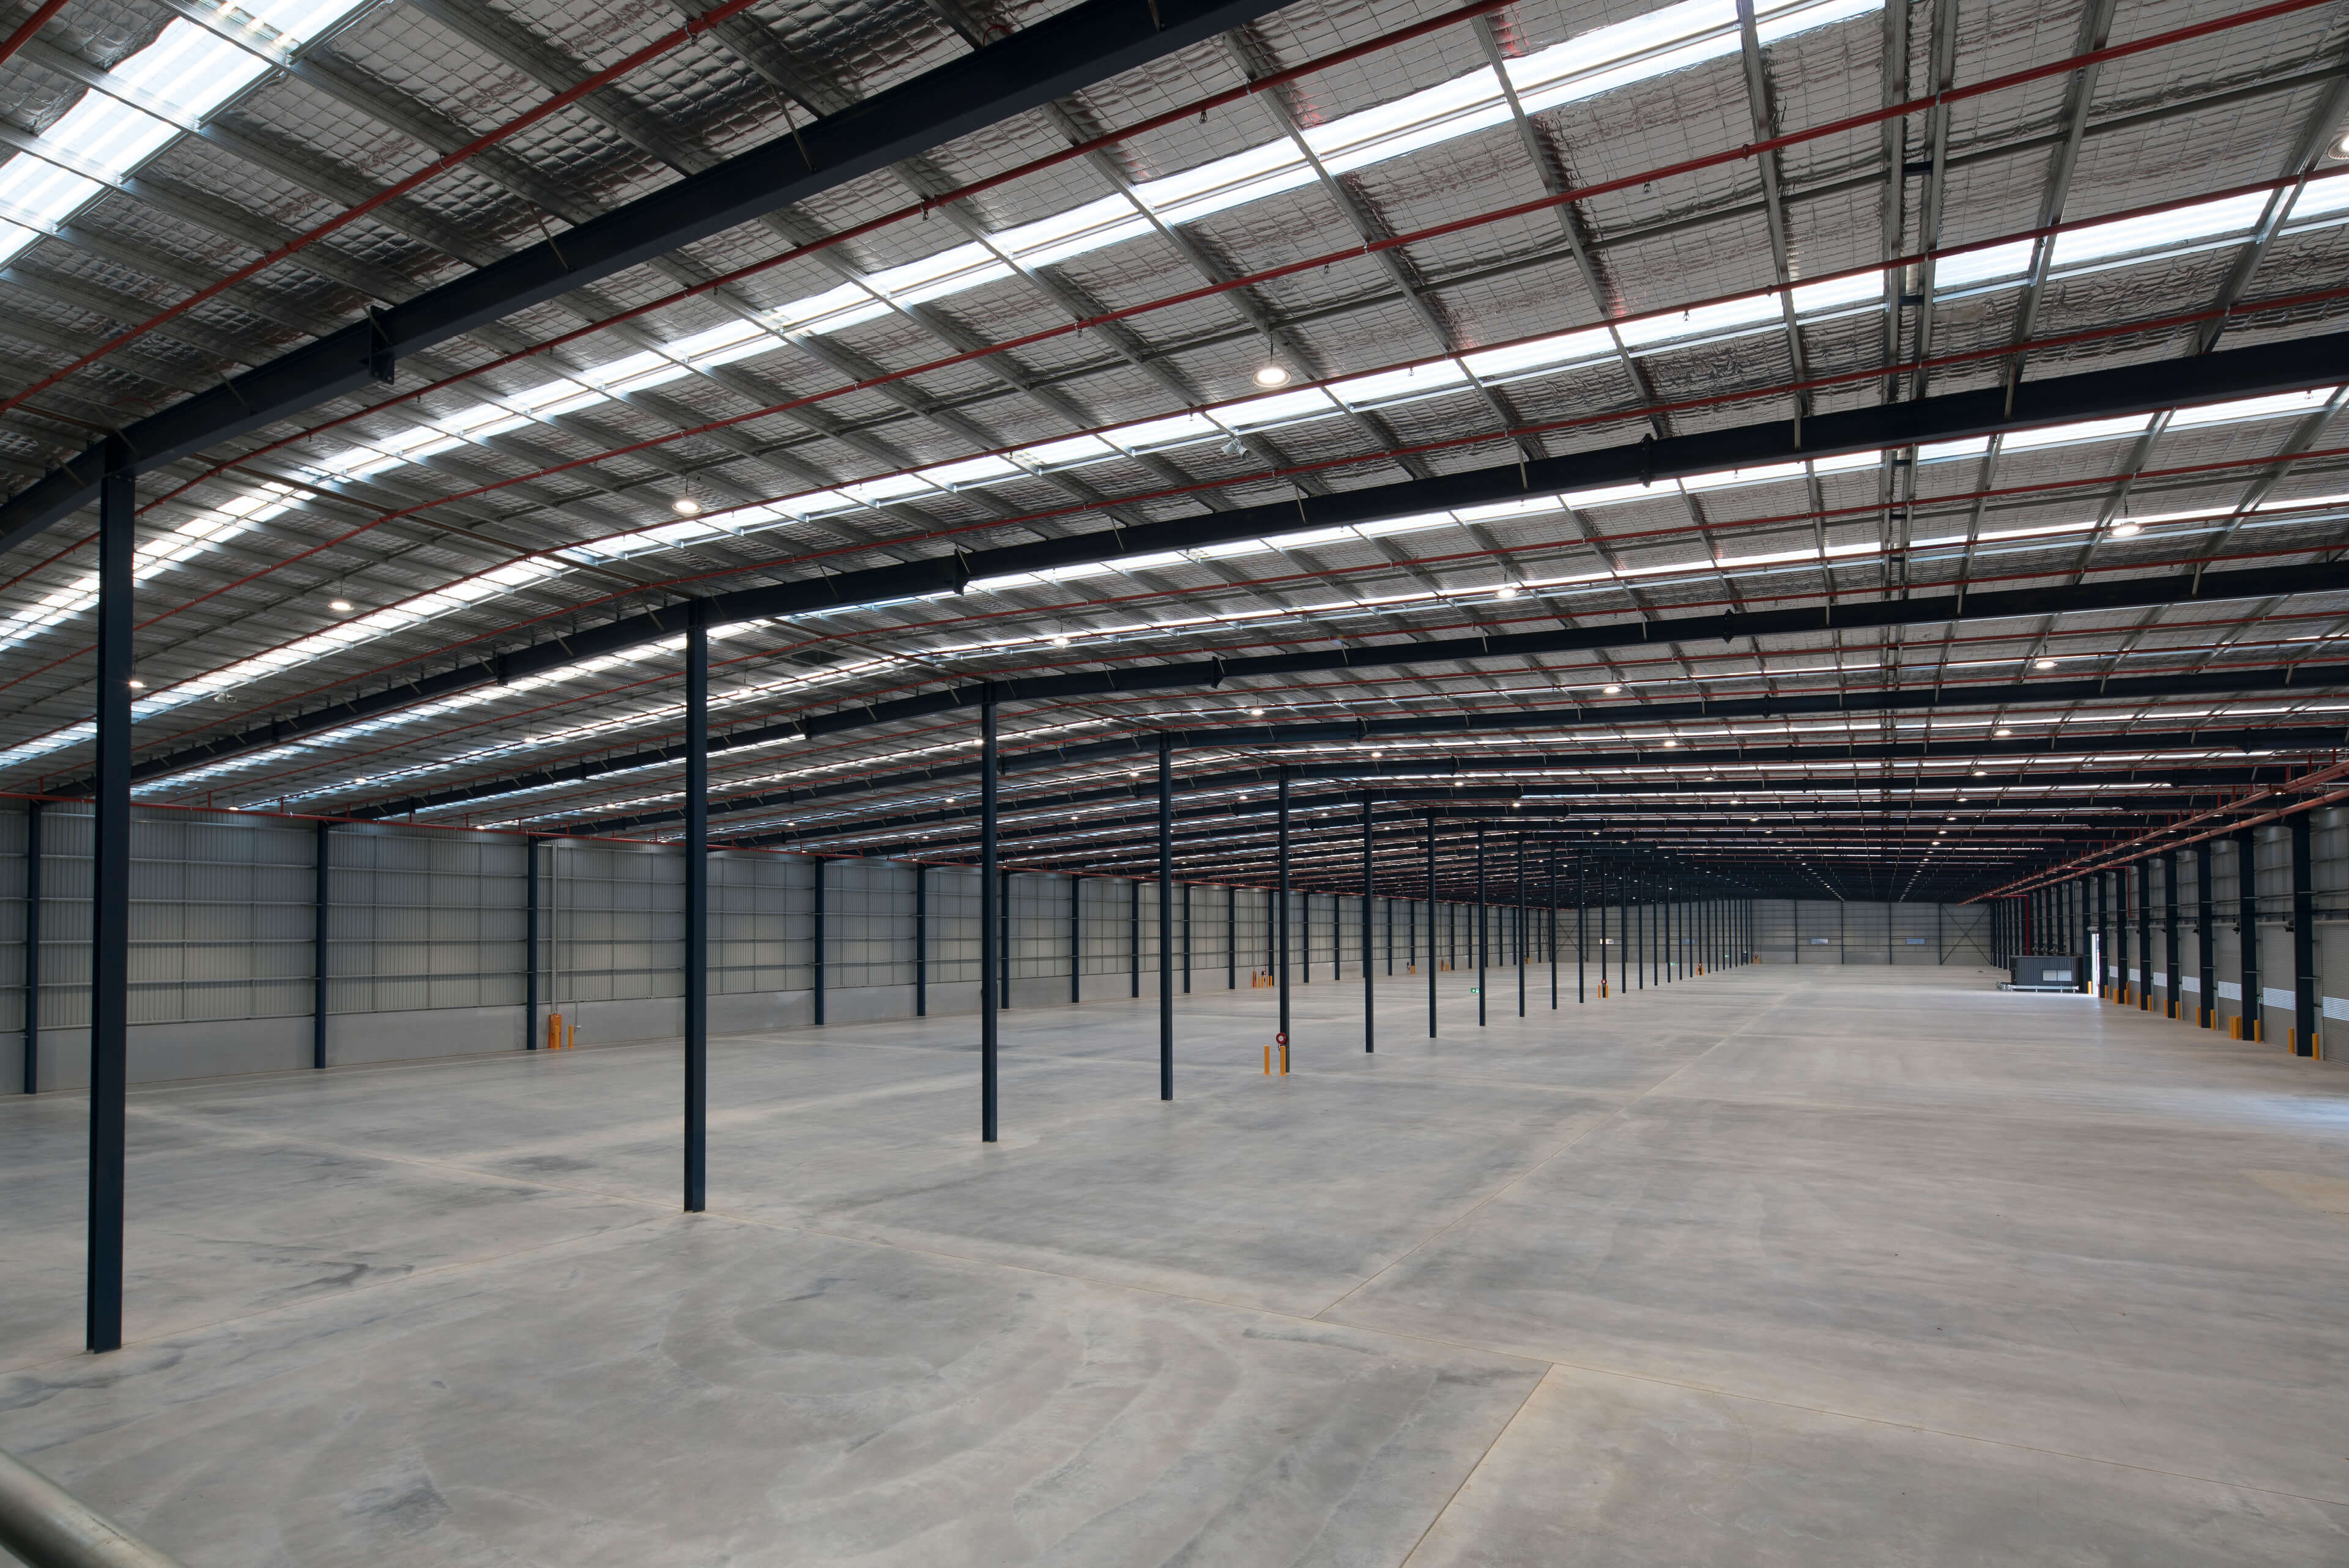 12 warehouse depth at coopers paddock warrick farm taylor construction industrial